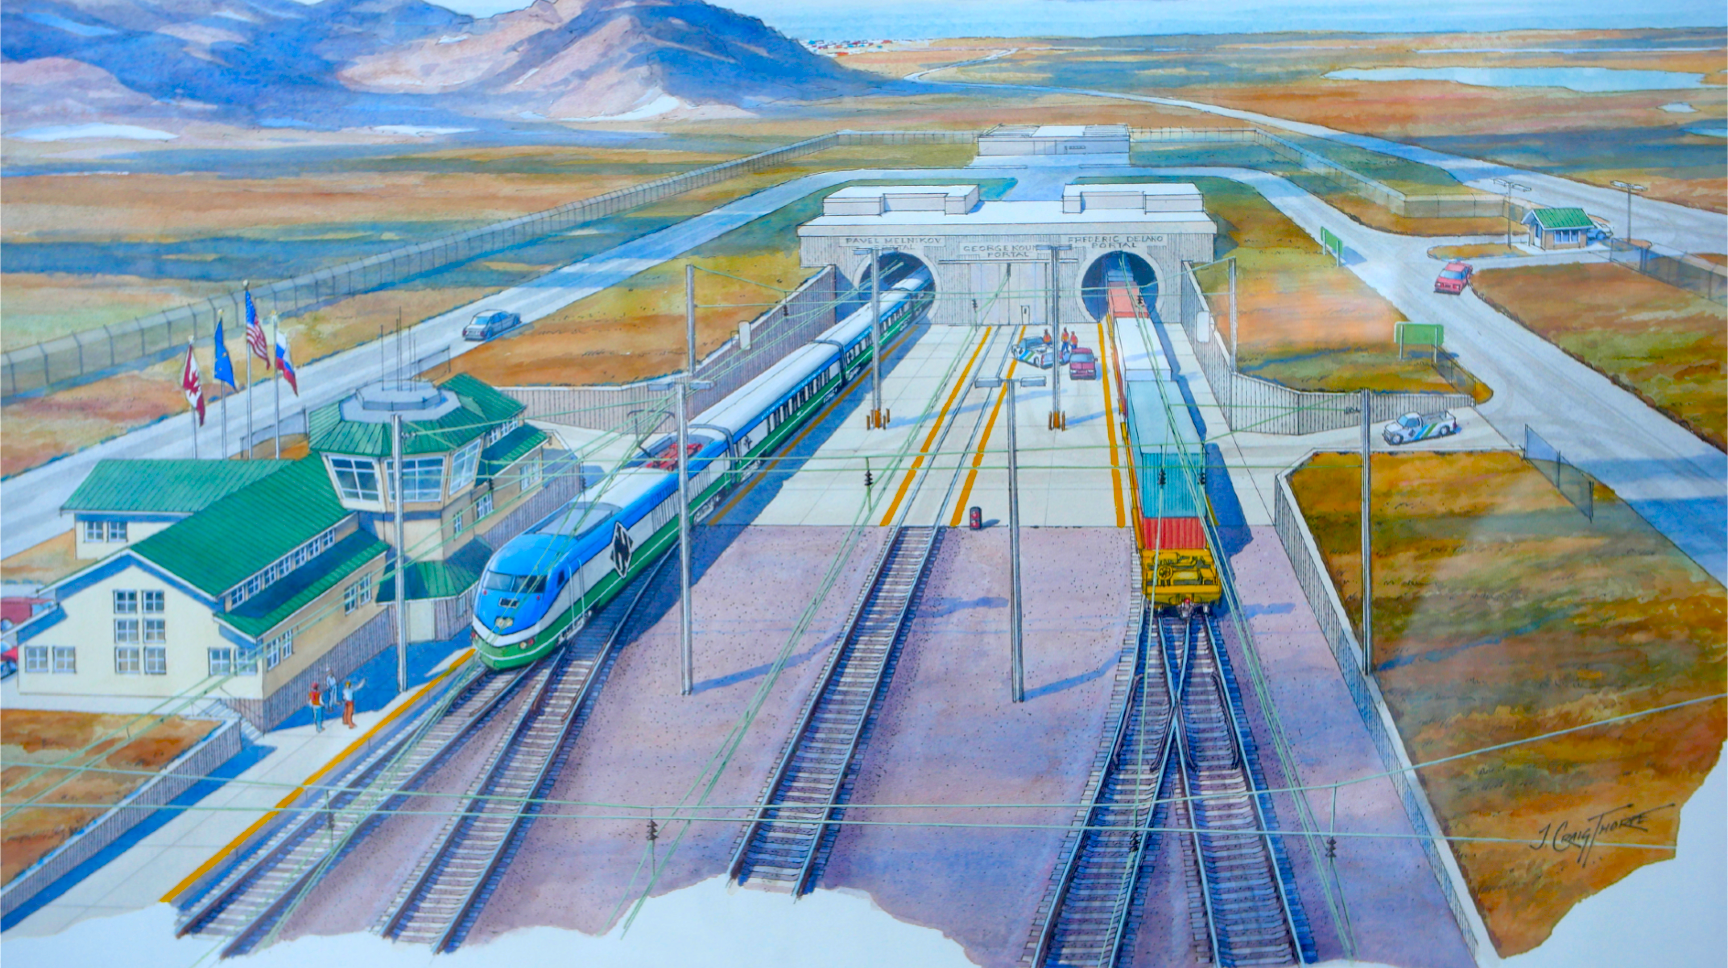 a painting of a train station with a train on the tracks.